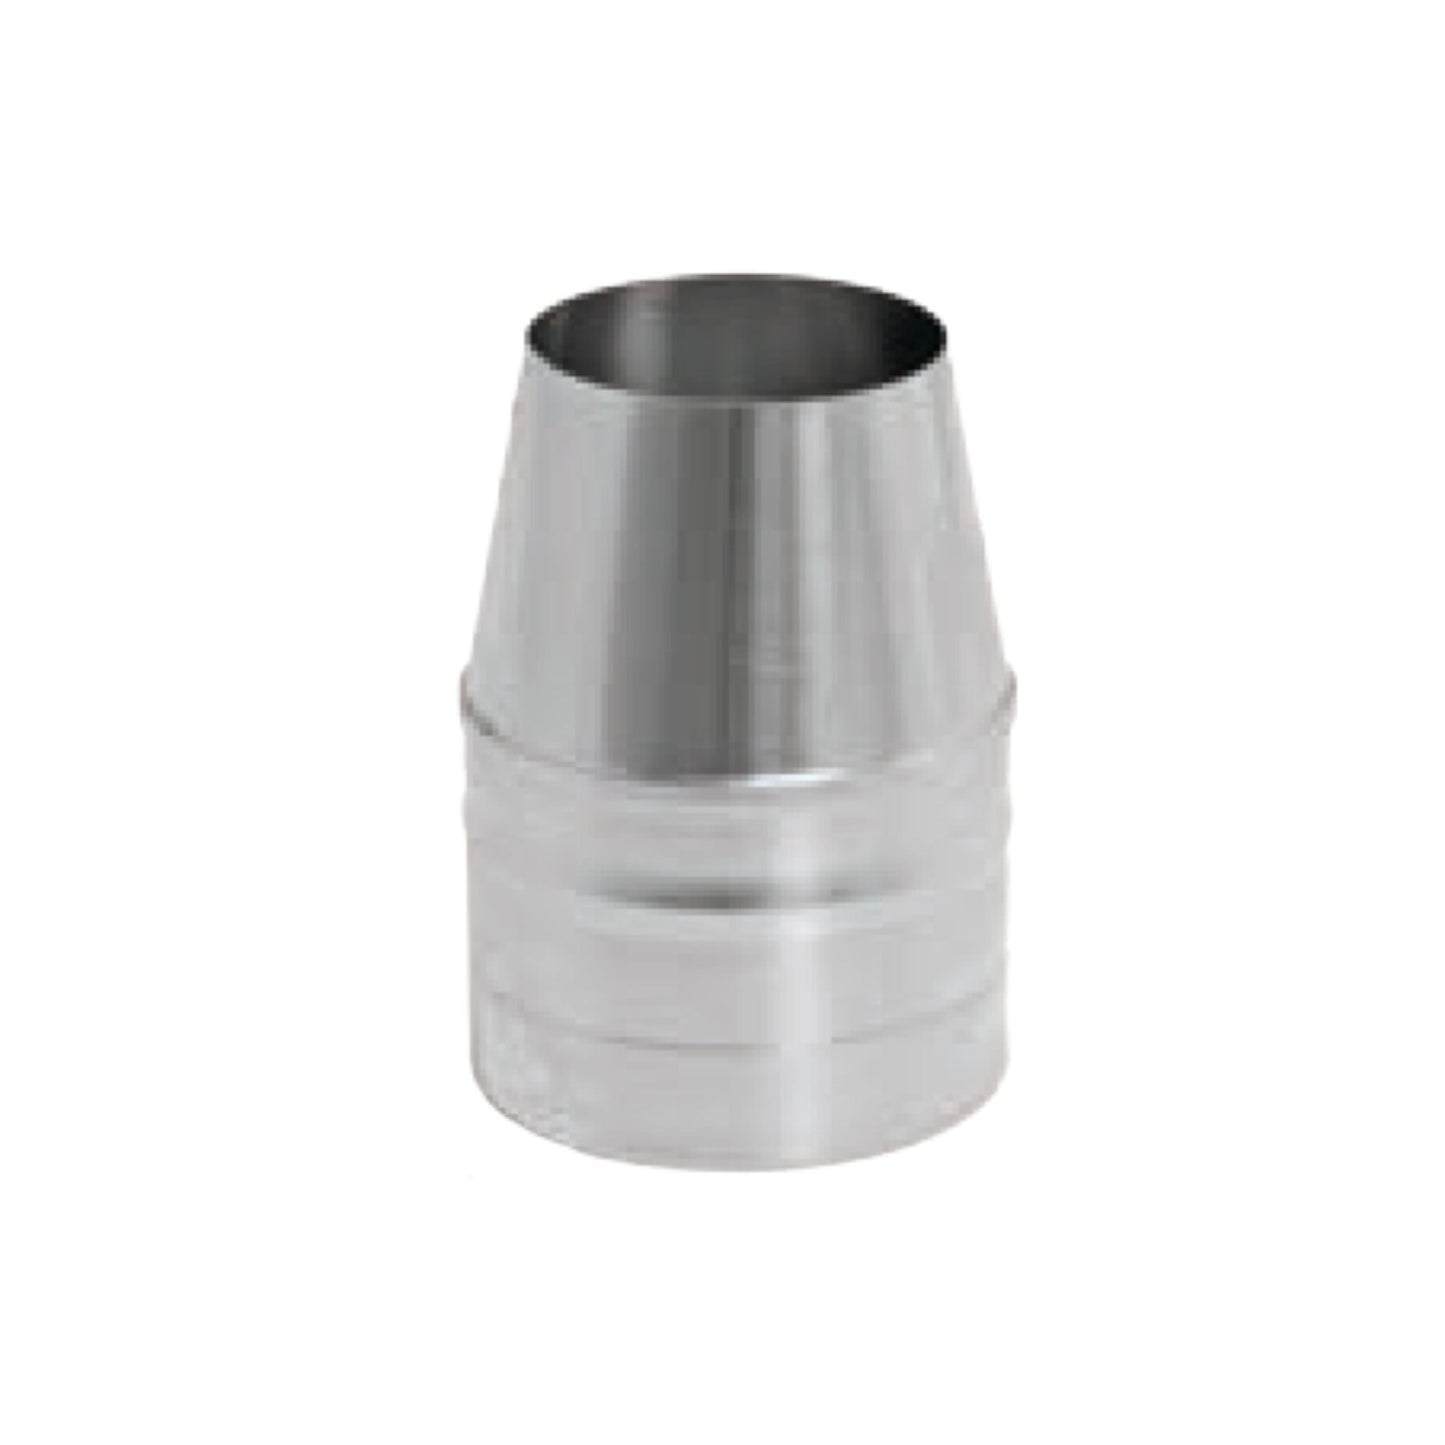 DuraVent FasNSeal 12" x 7" 29-4C Stainless Steel Termination Cone